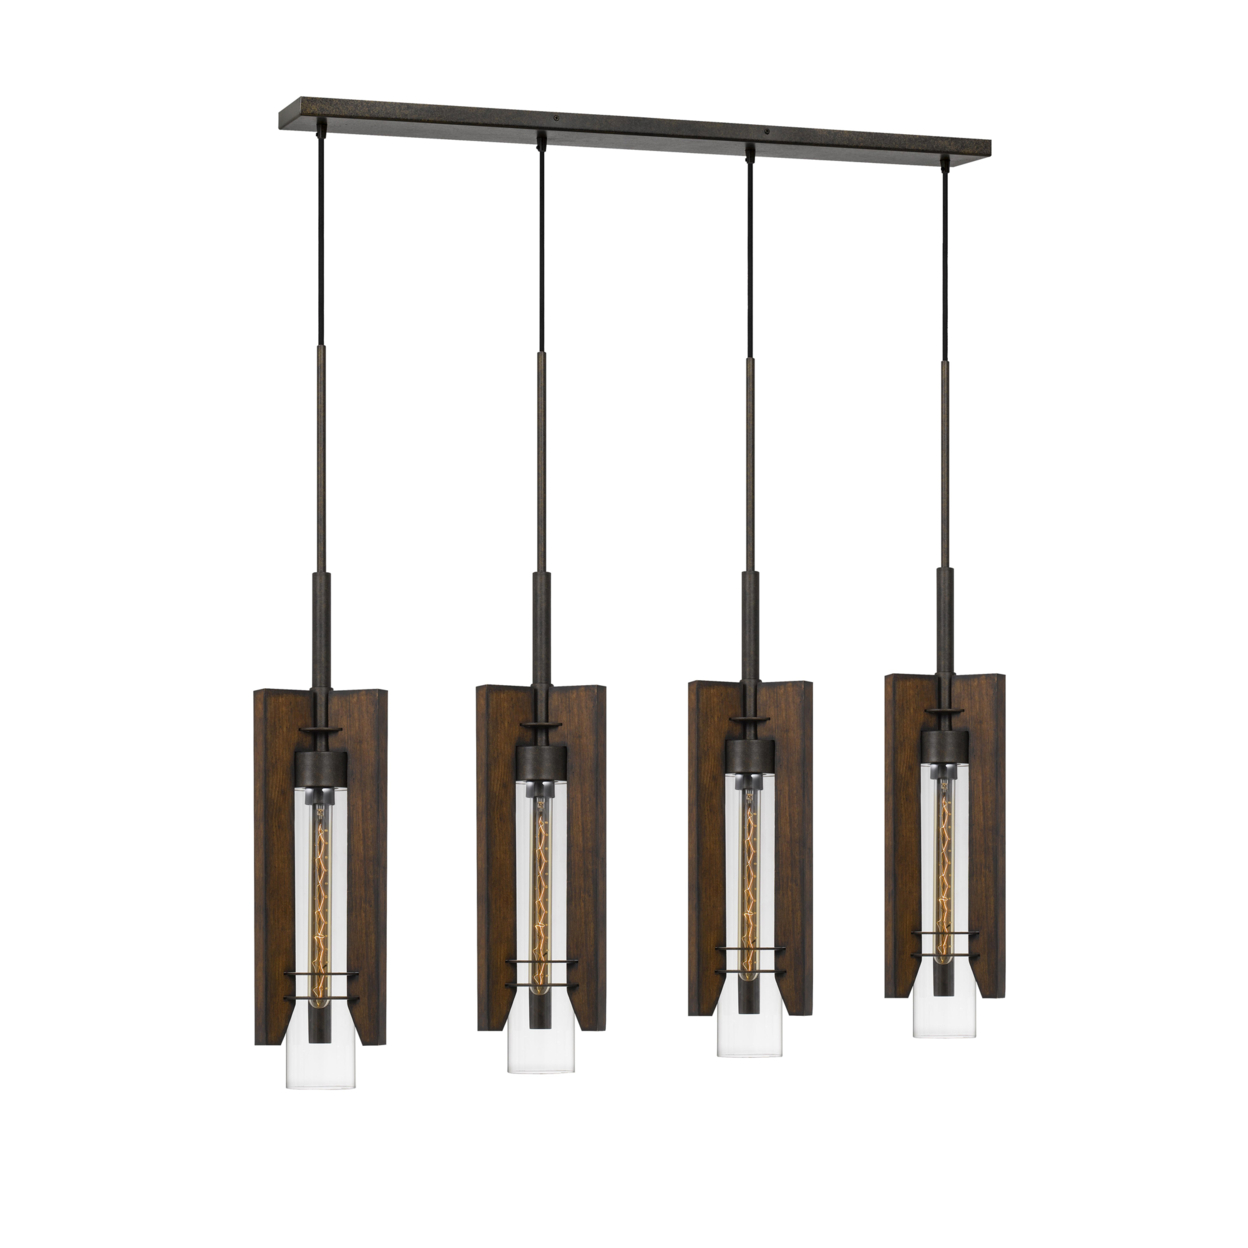 4 Bulb Pendant Fixture With Wooden And Glass Shades, Brown And Black- Saltoro Sherpi